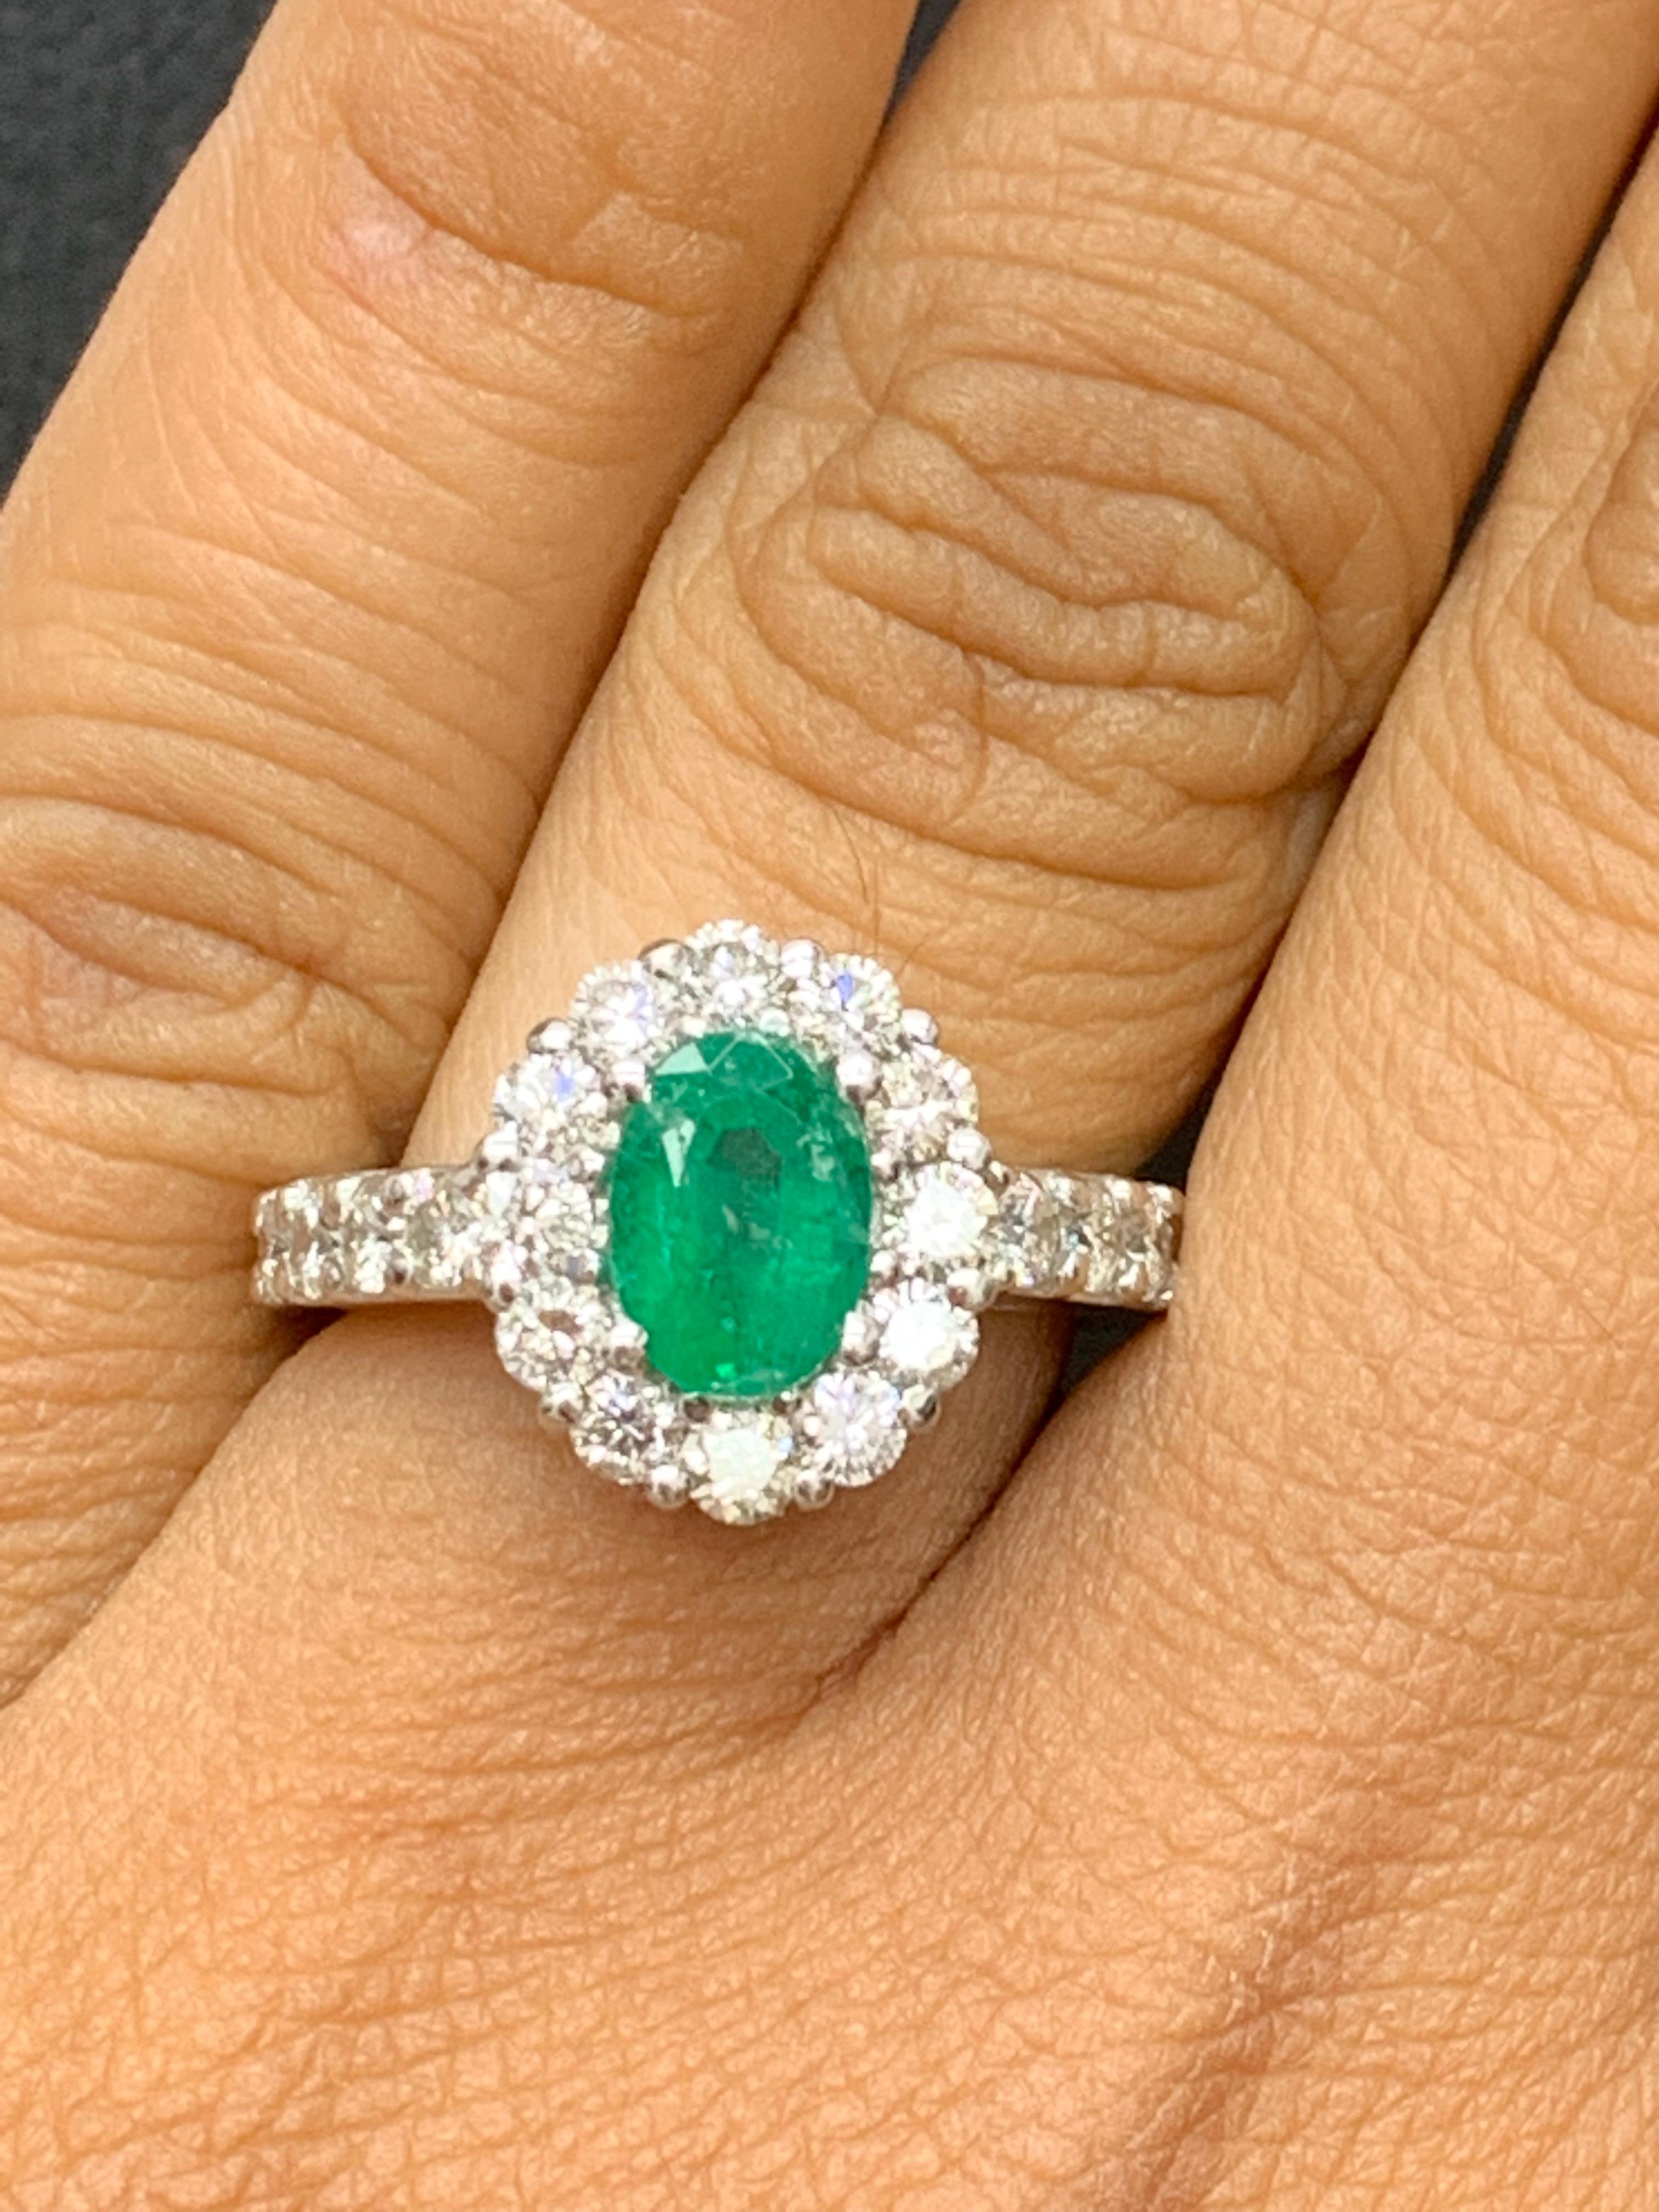 Features a 1.35 carat Oval cut Emerald surrounded by a single row of round brilliant diamonds. Set in a diamond-encrusted band made in 14k white gold. Accent round diamonds weigh 1.01 carats total.

Style available in different price ranges. Prices